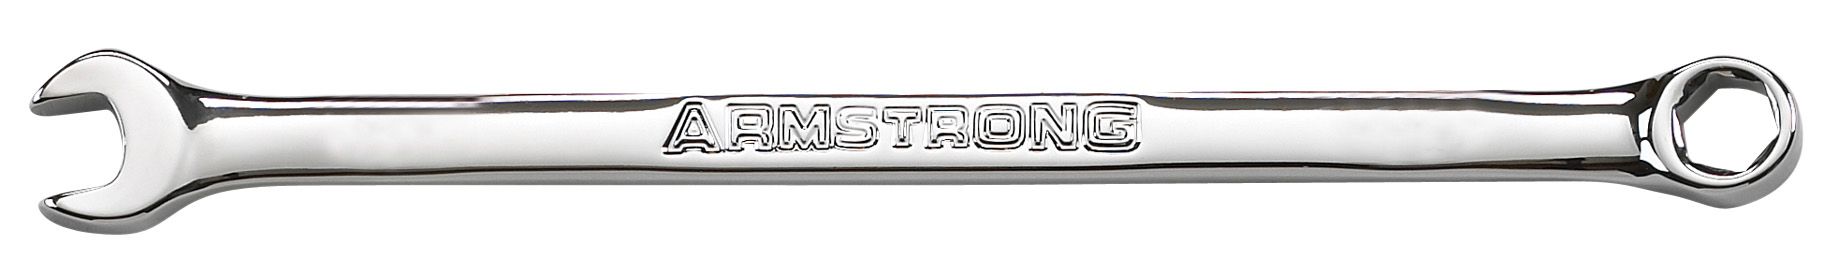 Armstrong 15 mm 6 pt. Full Polish Long Combination Wrench